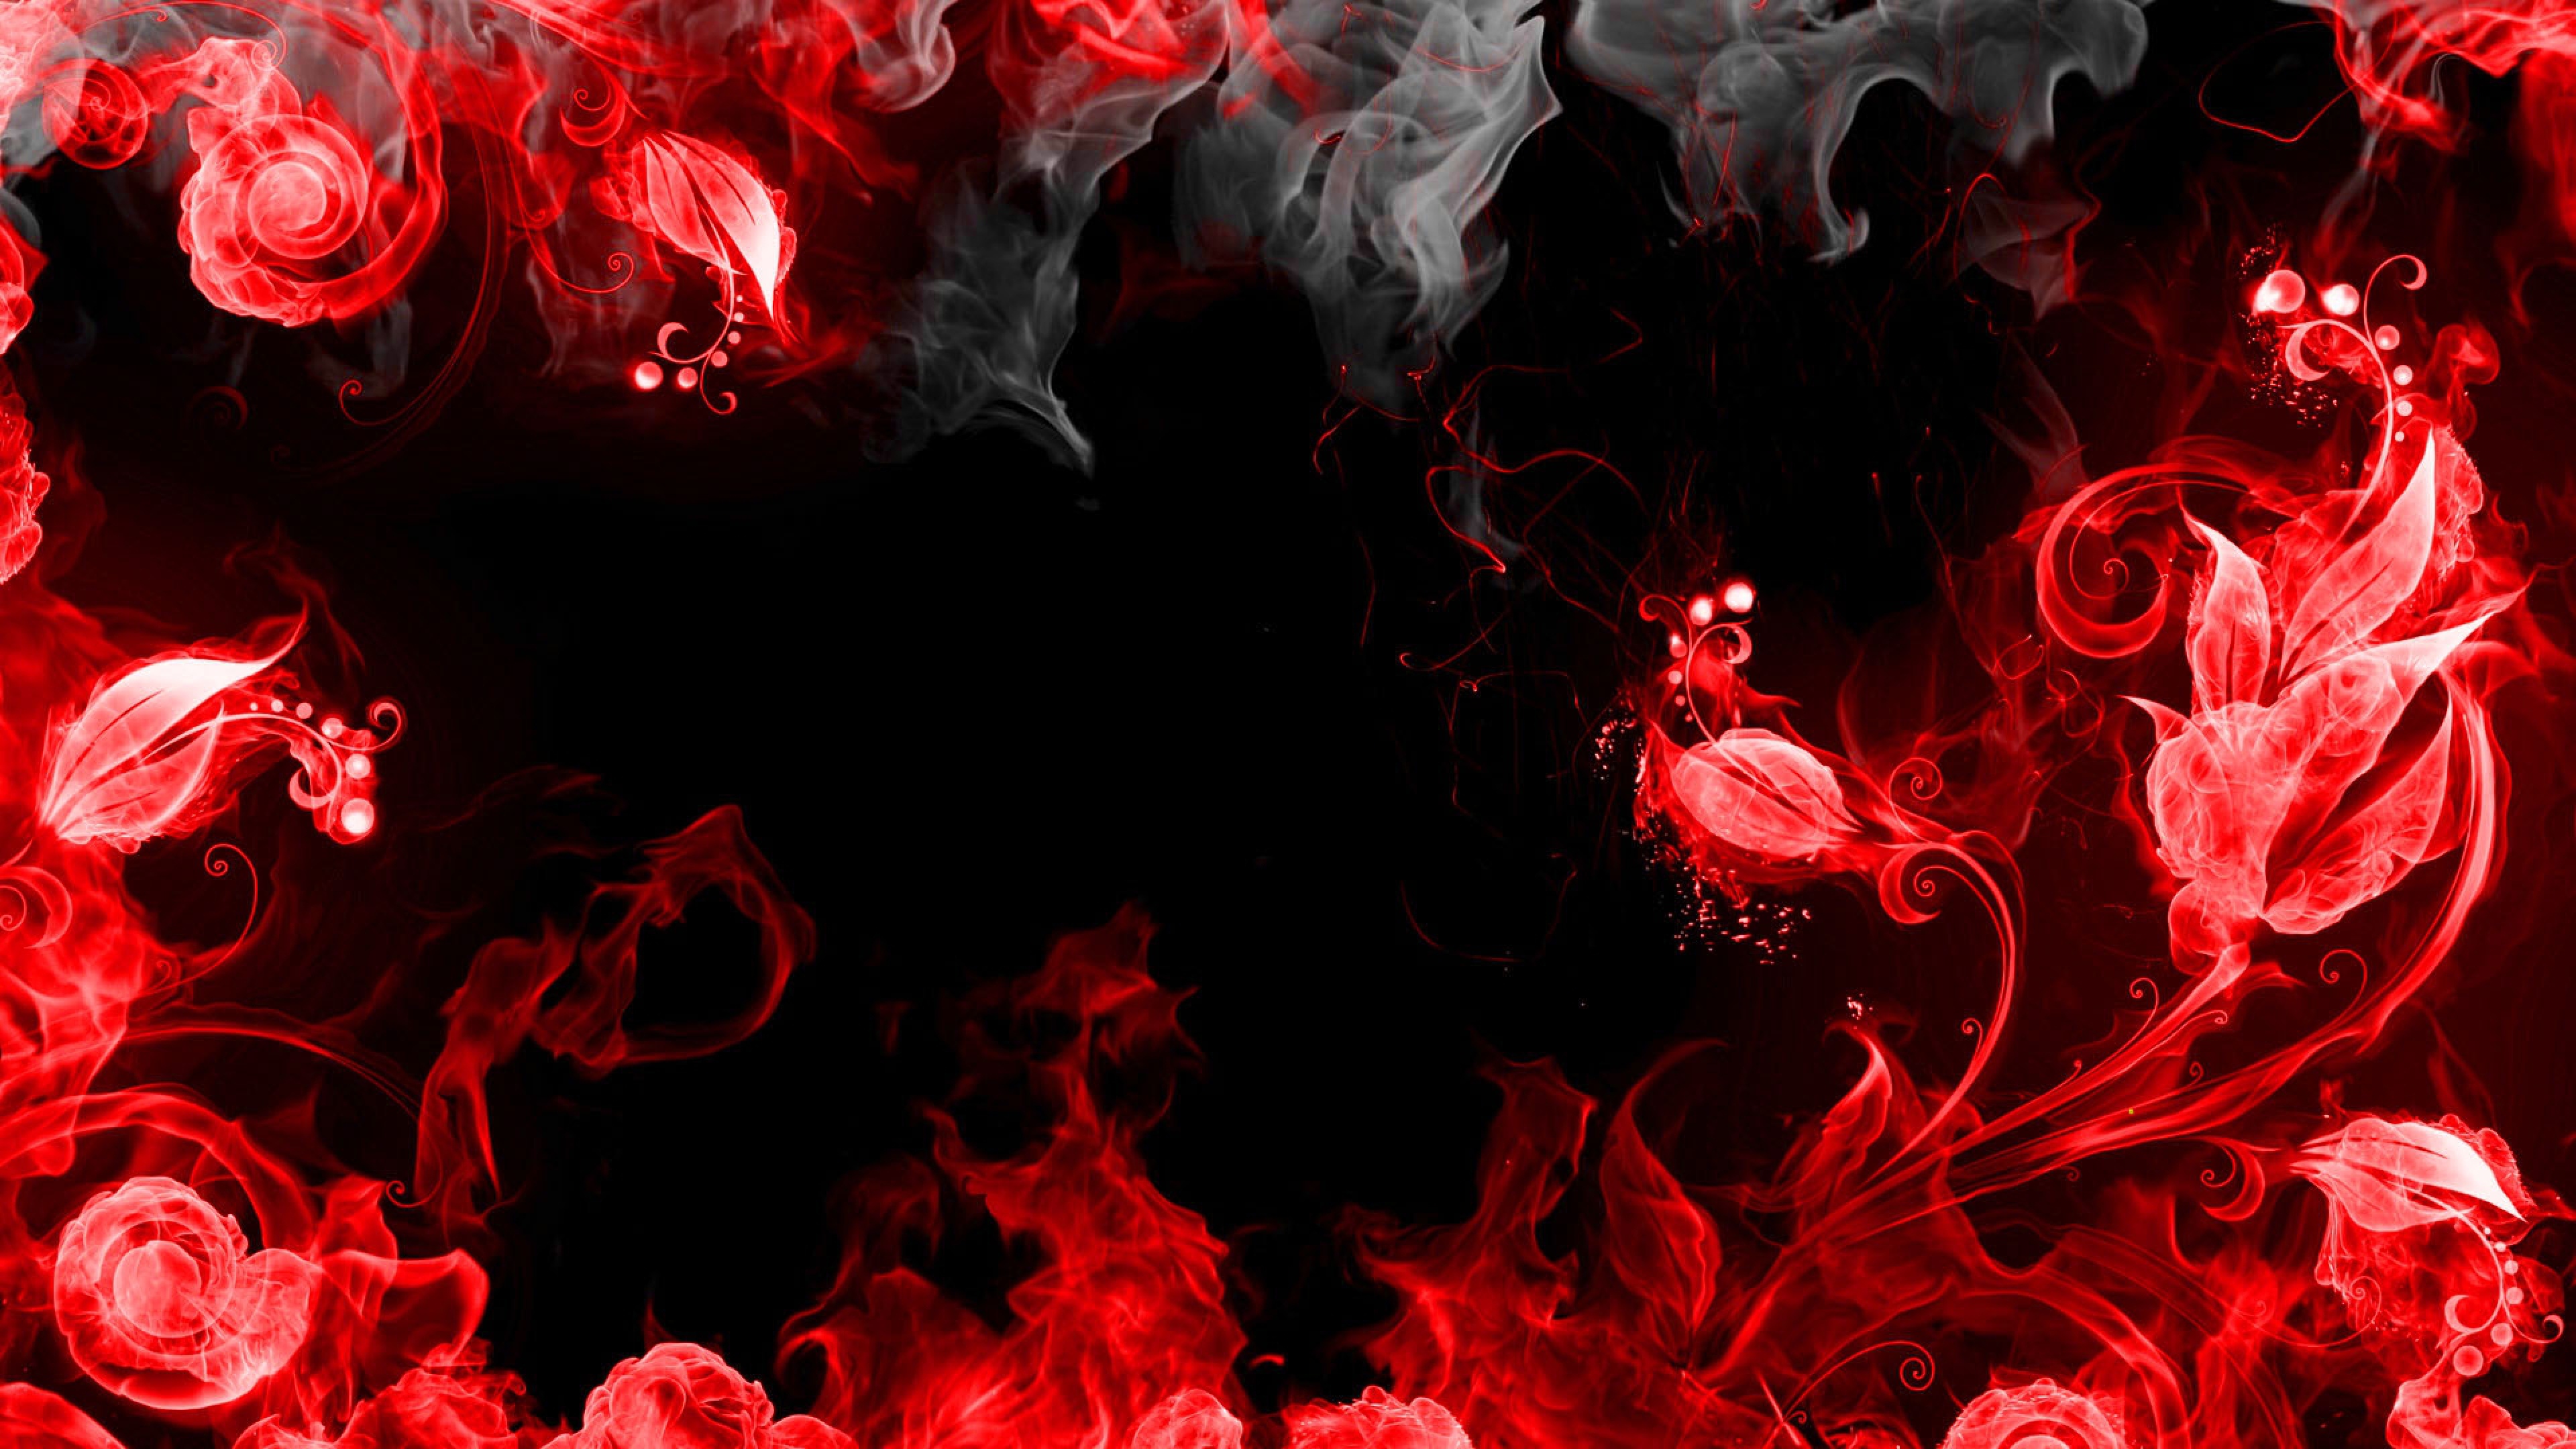 Download Wallpaper 3840x2160 abstraction red smoke black 4K Ultra 3840x2160